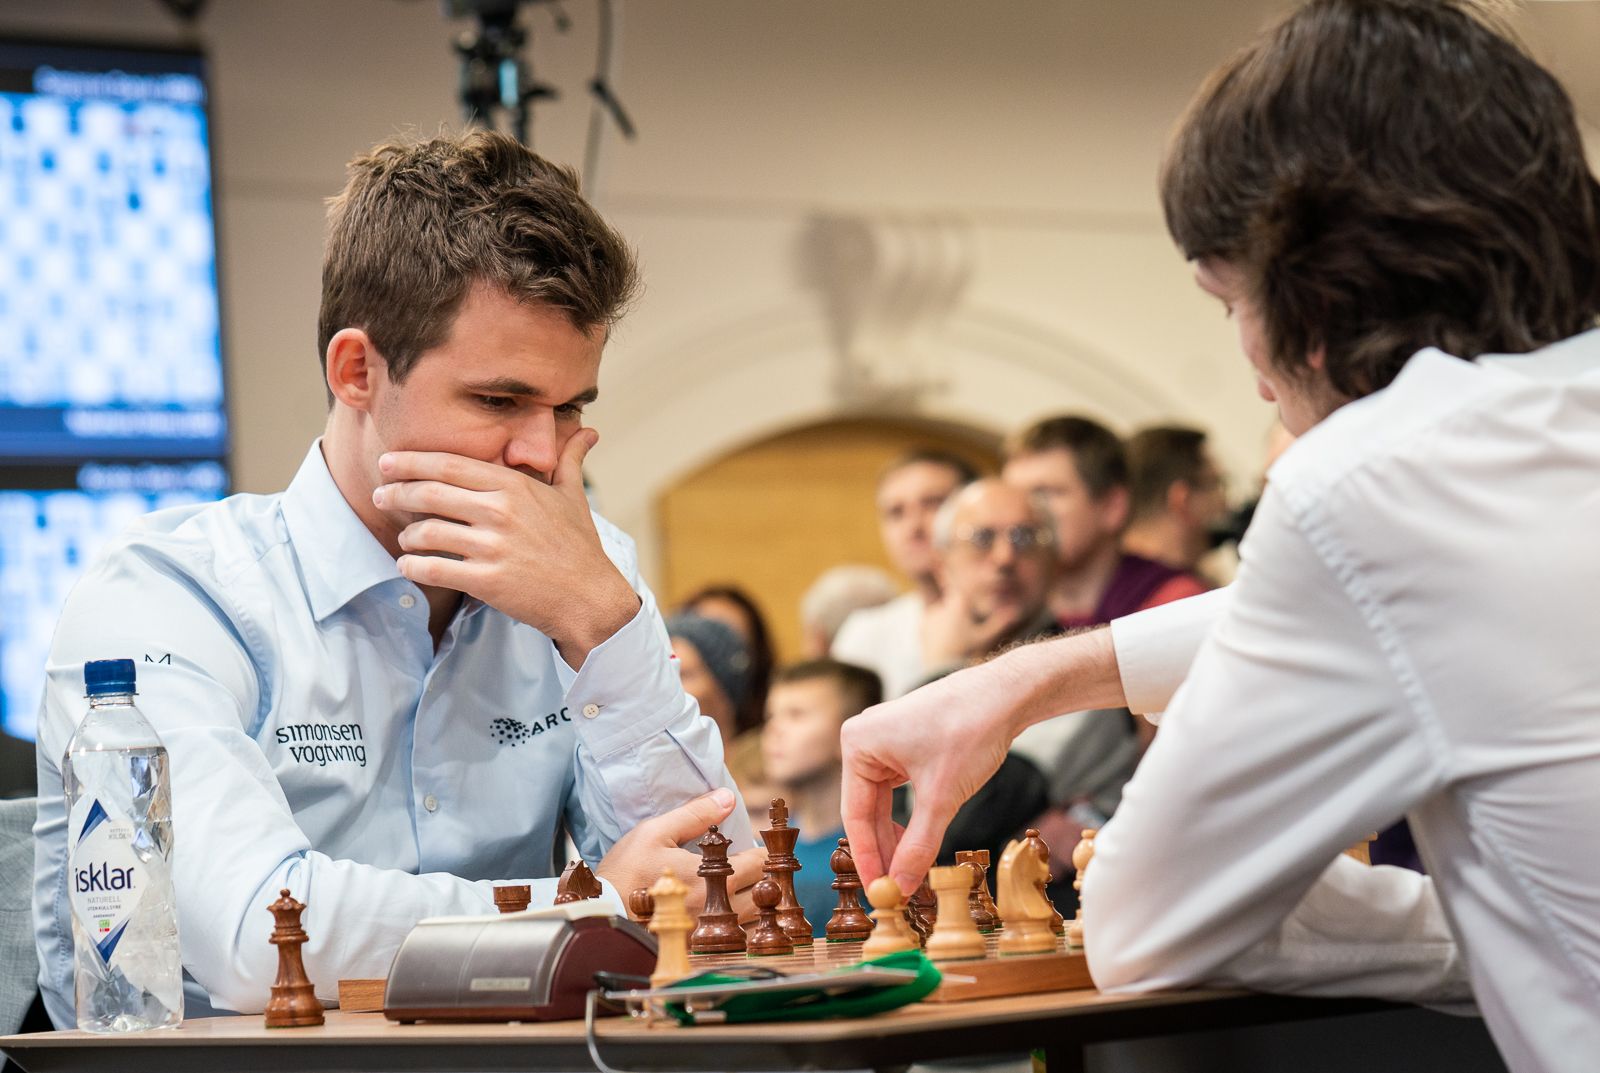 Daniil Dubov Catches Up With Leader at Superfinal